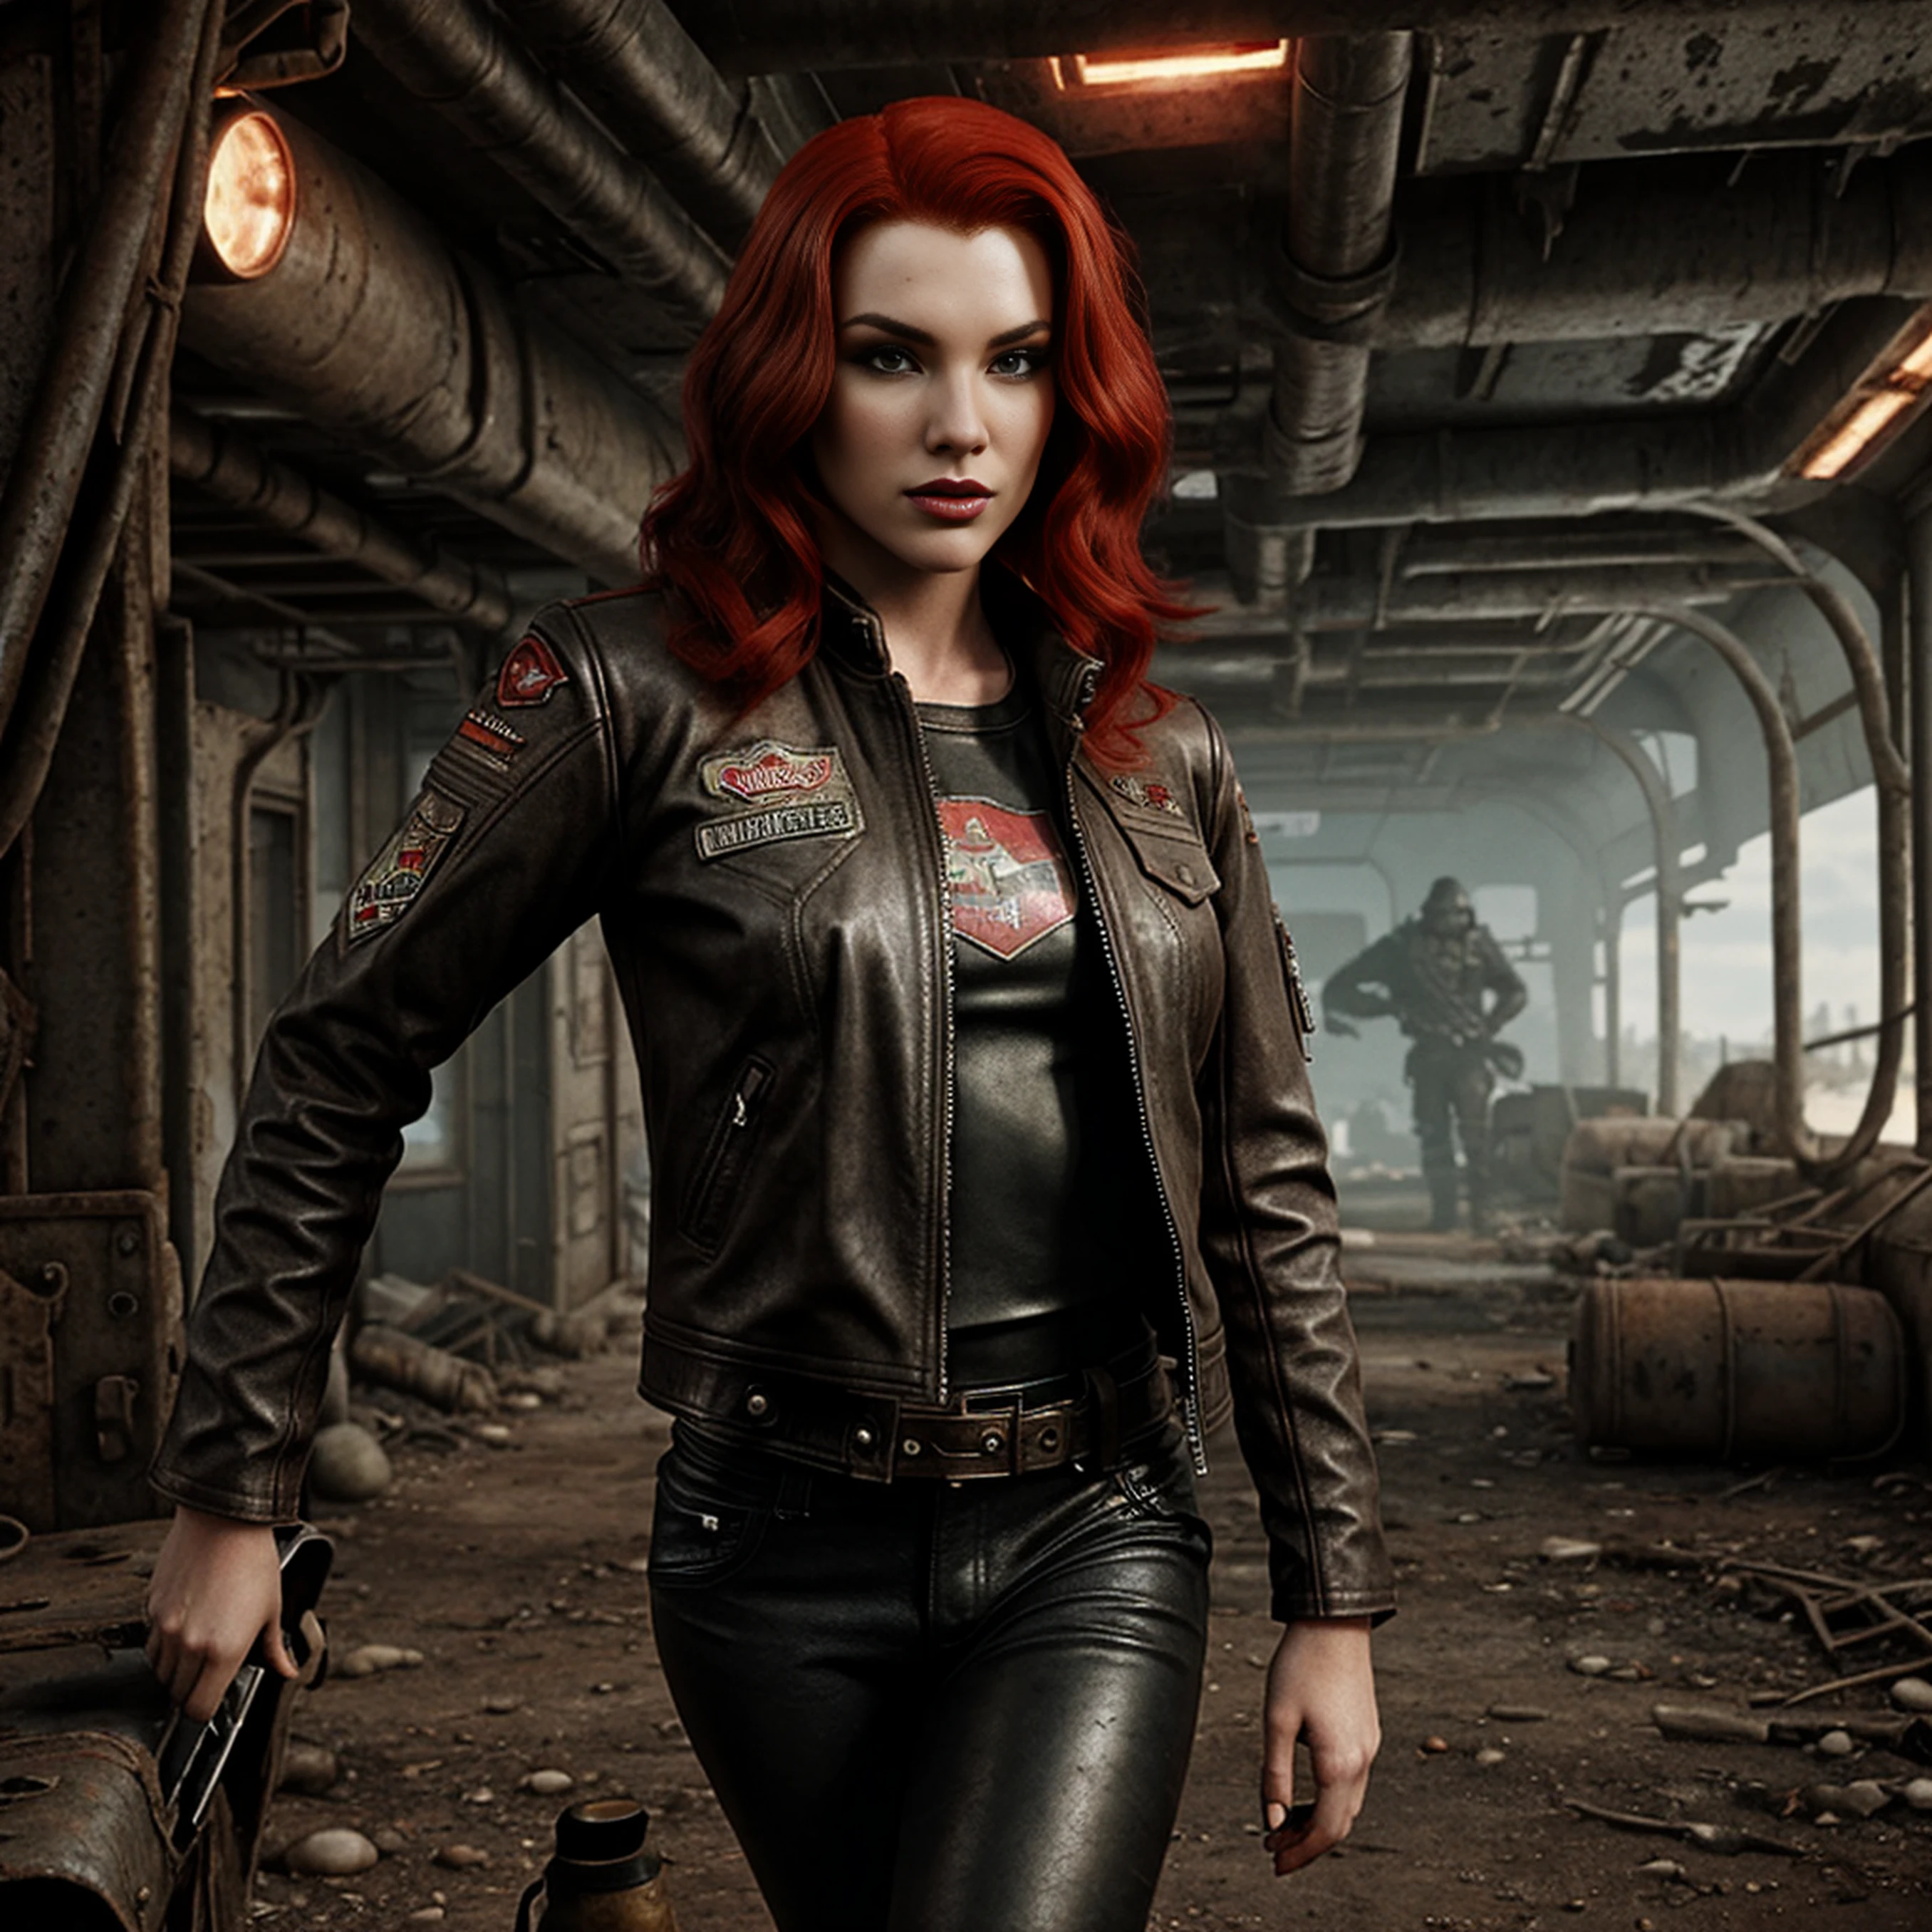 wasteland outlaw, red hair, black leather jacket, patches, retrofuturism, fallout, 50s